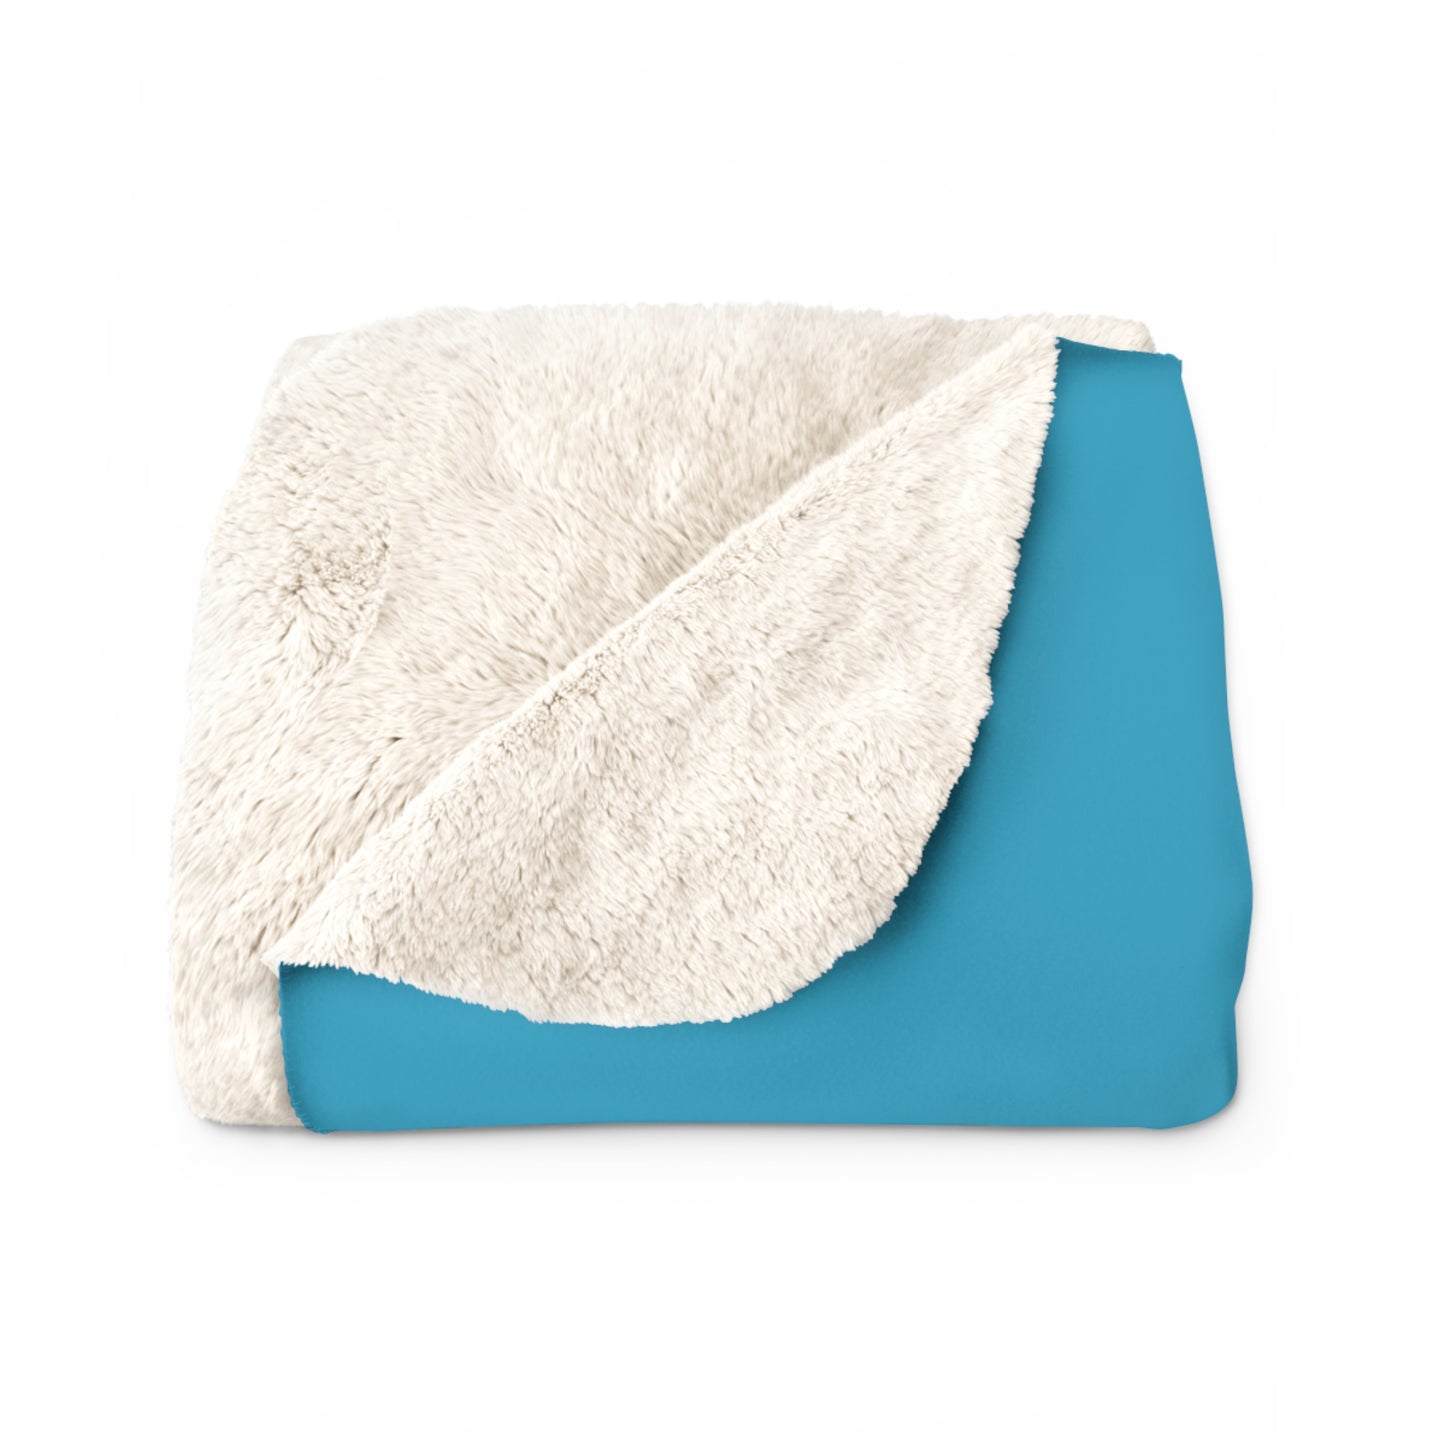 LUXURIOUS COZY BLANKET: THE EPITOME OF COMFORT AND WARMTH | Moon turquoise 